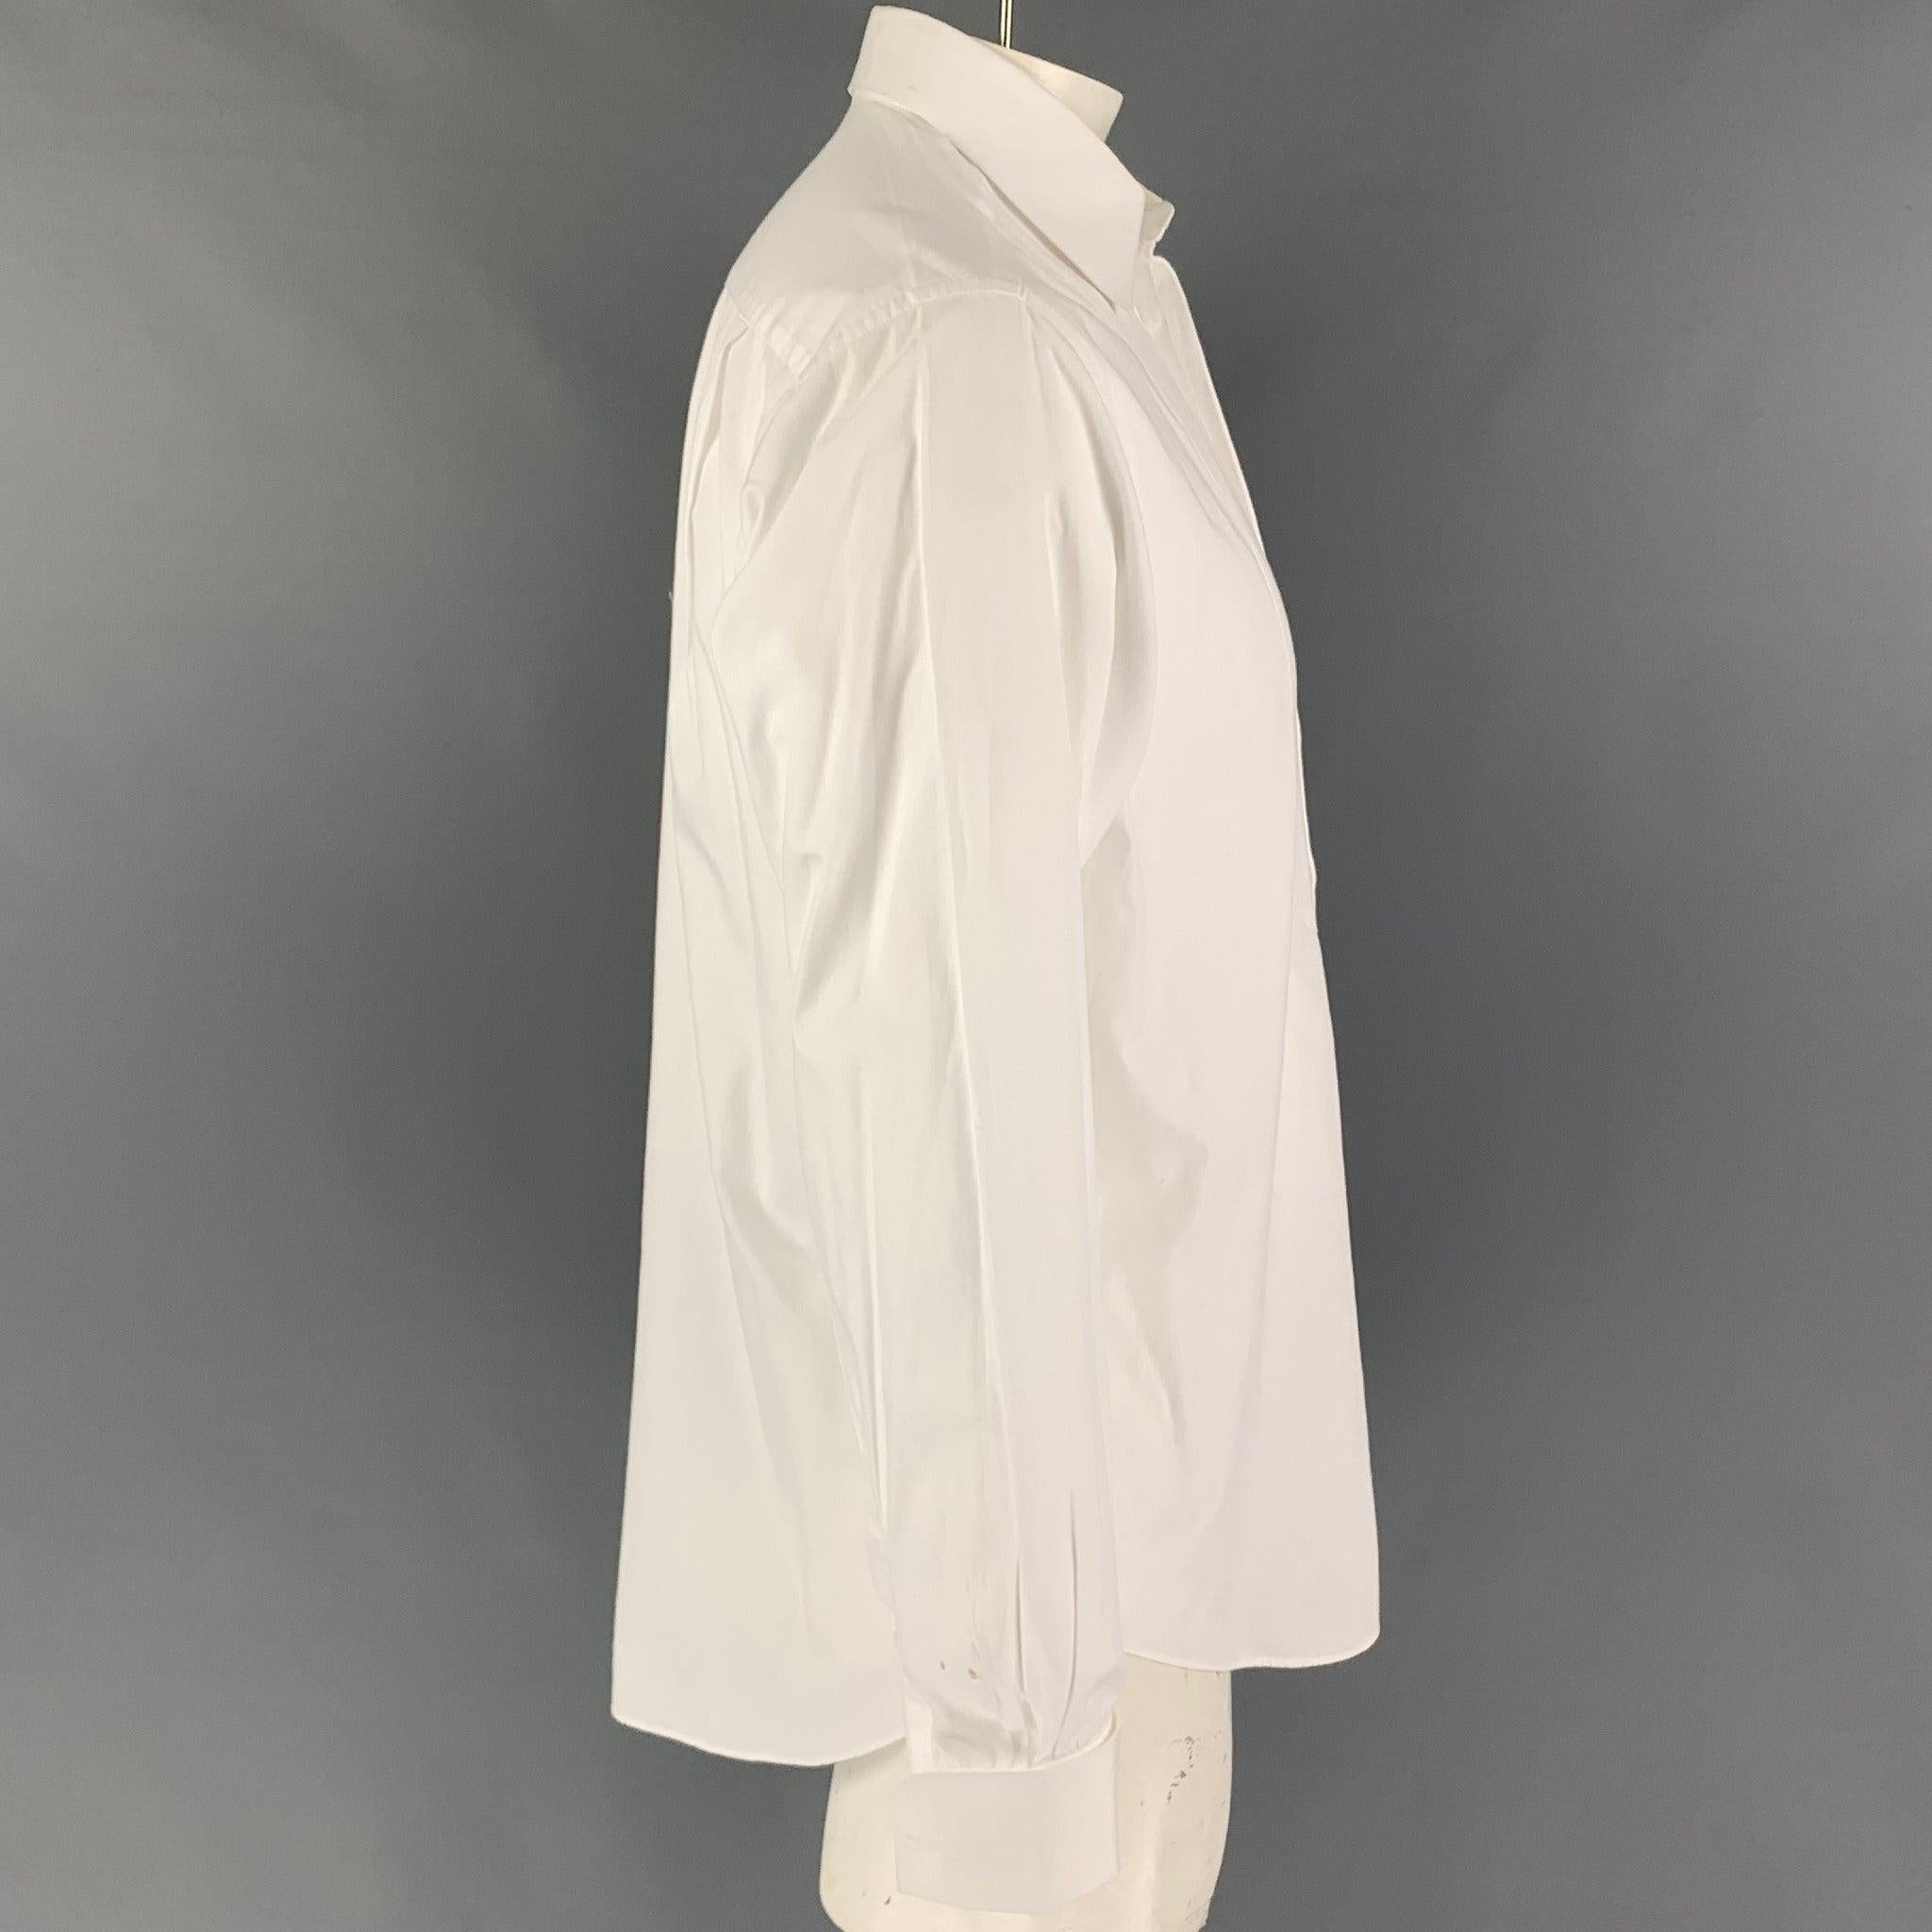 ARMANI COLLEZIONI tuxedo long sleeve shirt comes in a white cotton featuring french cuffs, spread collar, and a hidden placket closure. Made in Italy.
 Good
 Pre-Owned Condition. Small marks at right sleeve. As-Is.  
 

 Marked:  15.5/39 
 

